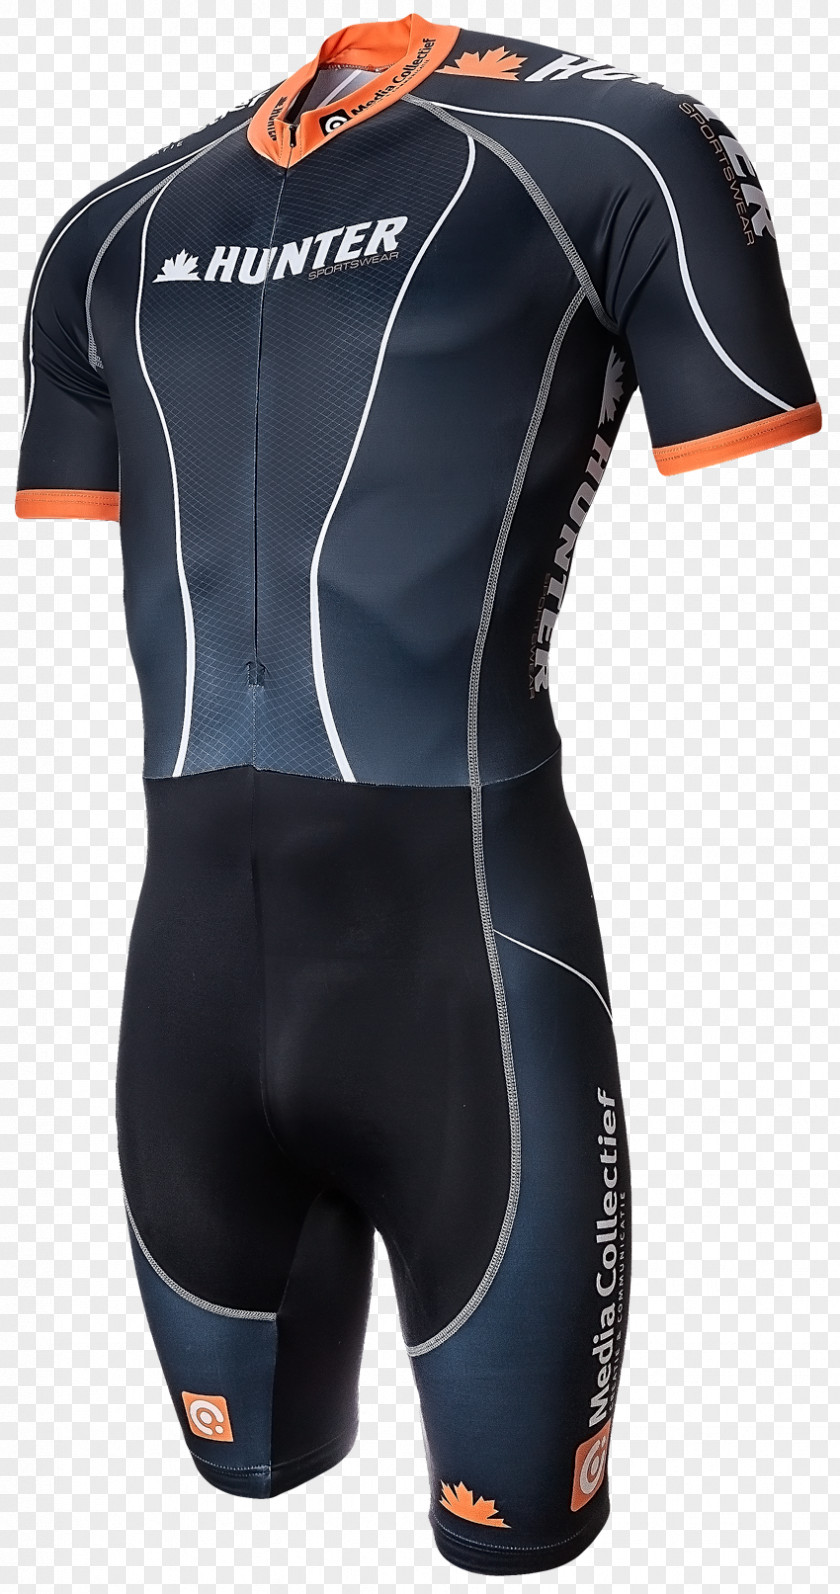 Bicycle Wetsuit Sleeve Clothing Uniform Sport PNG